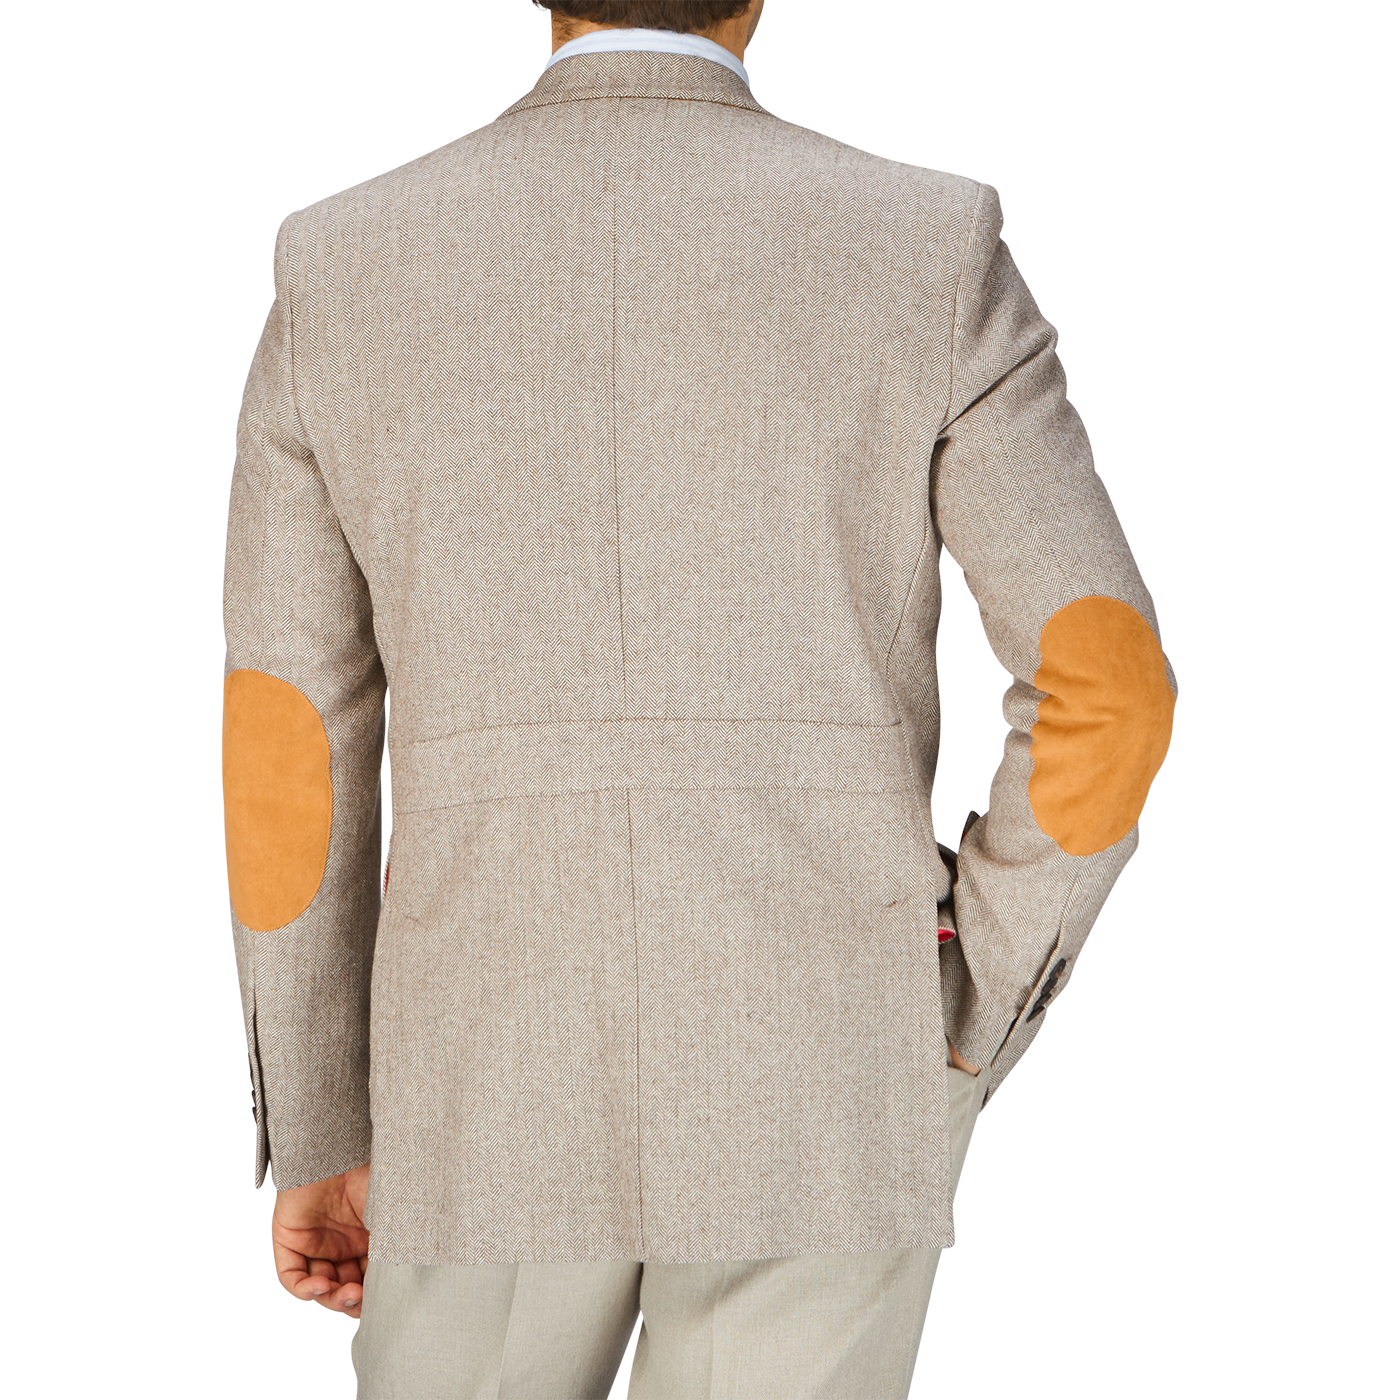 A man in Italy is seen from behind in an Alexander Kraft Monte Carlo beige herringbone wool linen Provence jacket with orange patches.